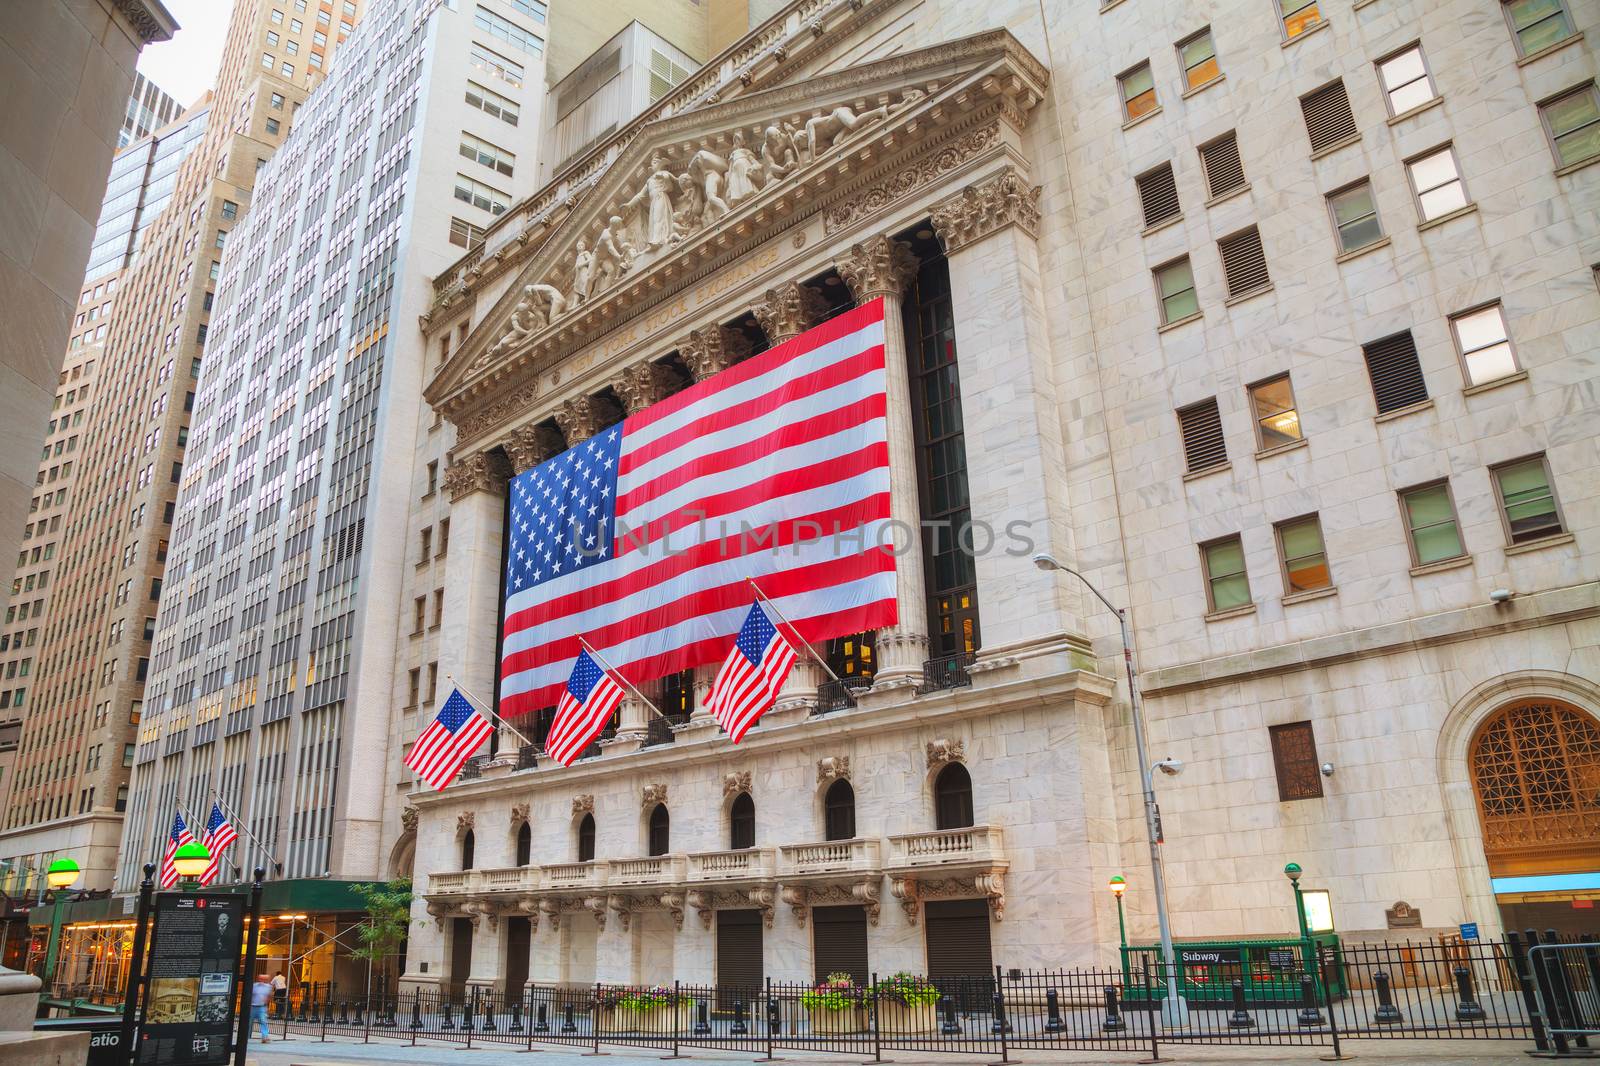 NEW YORK CITY - September 5: New York Stock Exchange building on September 5, 2015 in New York. The NYSE trading floor is located at 11 Wall Street and is composed of 4 rooms used for facilitation of trading.